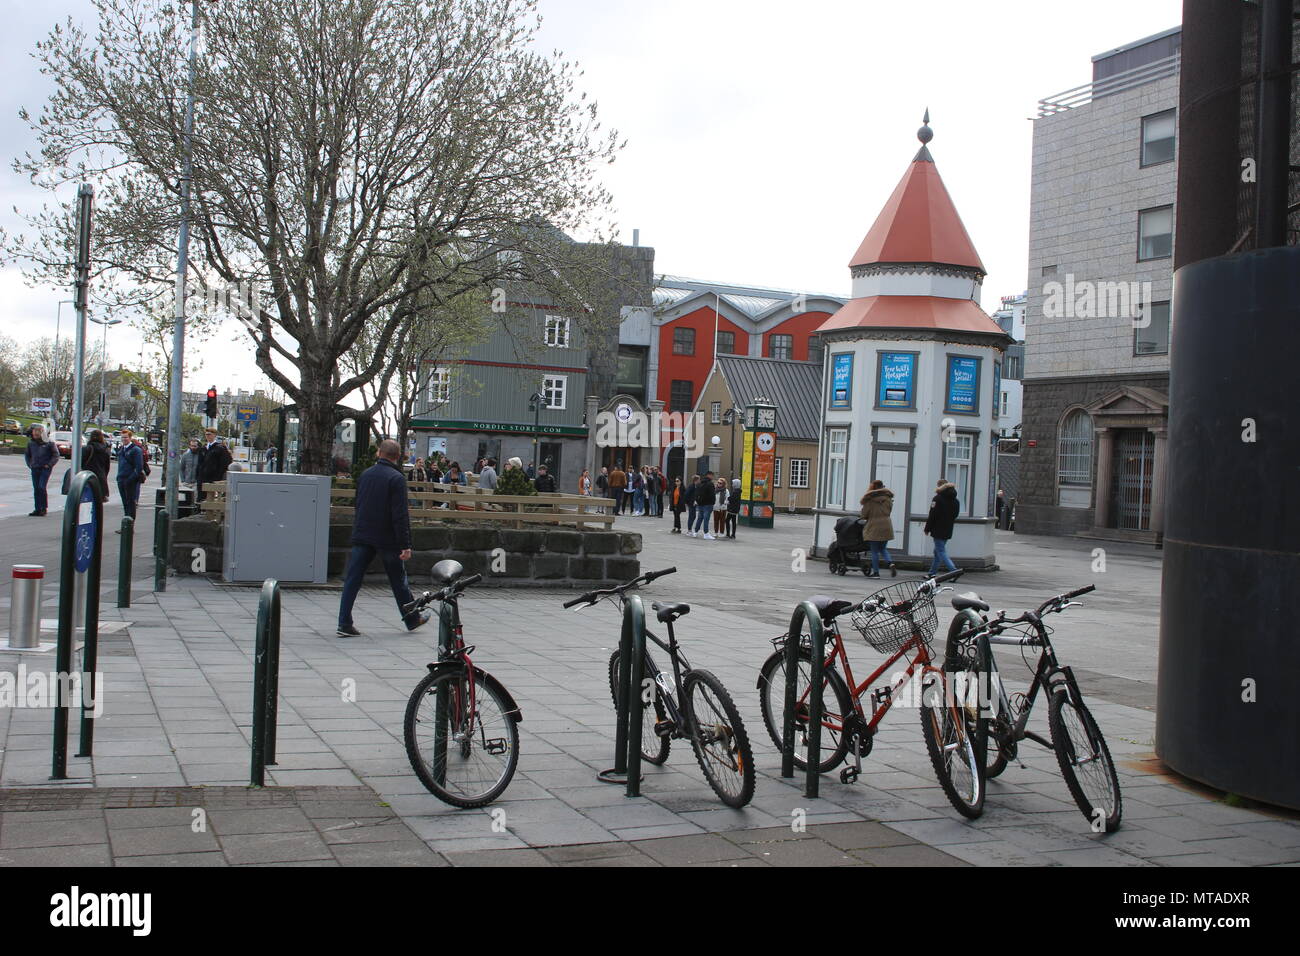 Reykjavik Iceland, May 13 2018: Bikes neaty lined up in a shopping district in the city. Reykjavik is a very walking or cycling friendly city. Stock Photo